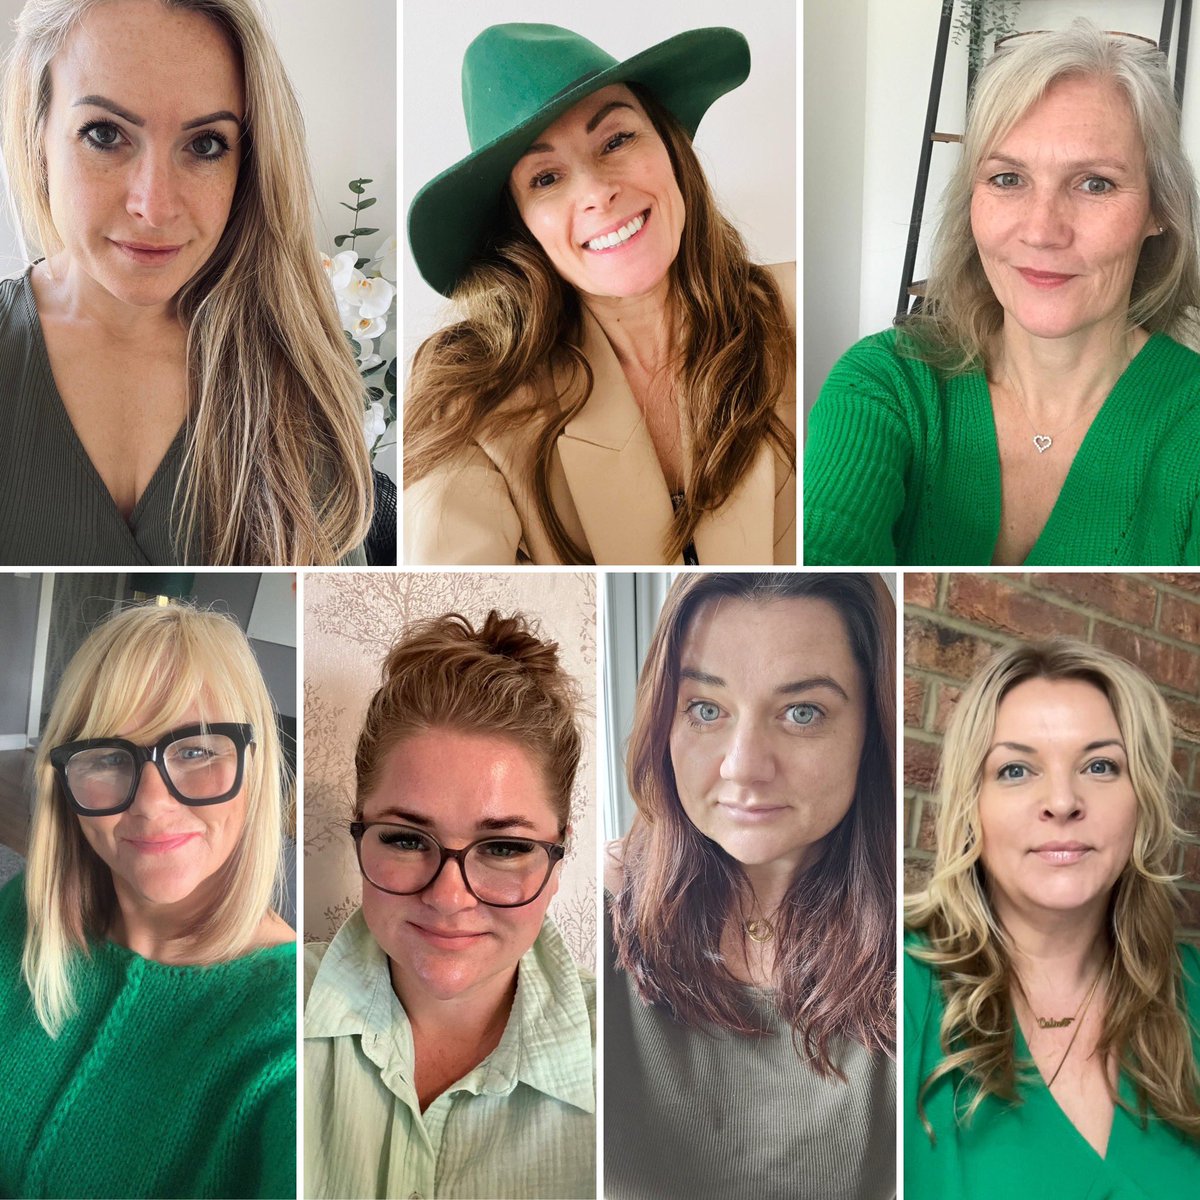 #WearGreenToBeSeen The team is supporting @CASPA_Online a local, #Bromley charity who provide invaluable support to autistic/neurodivergent children, adults and families 💚 As part of #AutismAcceptanceWeek we wore green and donated to this brilliant cause 💚 #AutismAcceptance